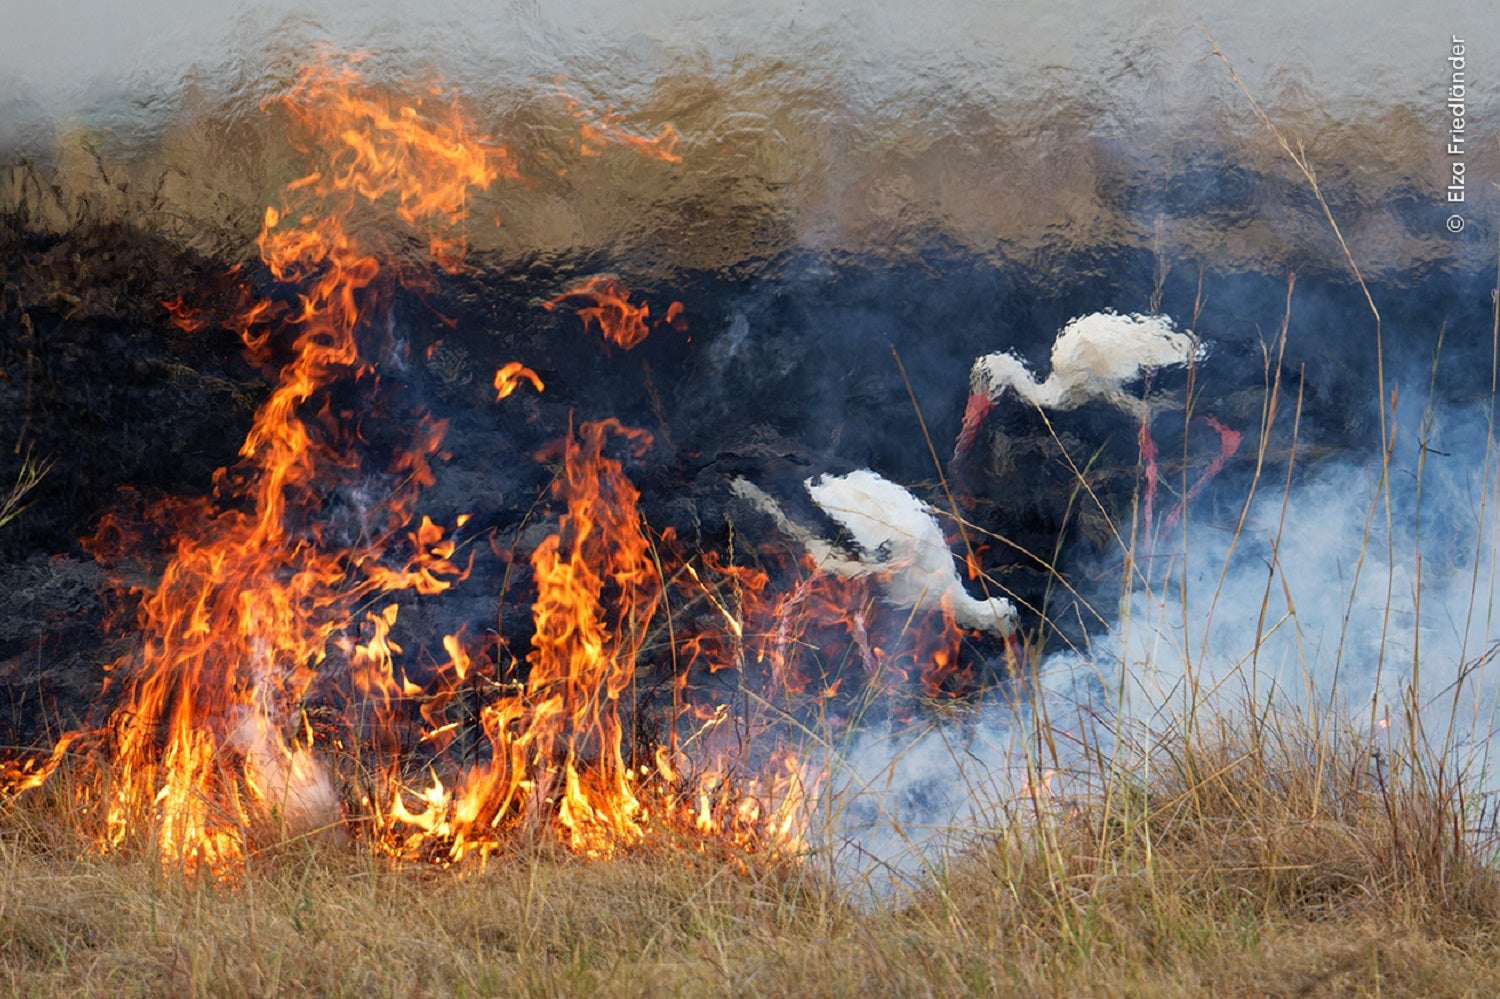 White storks behind a controlled burn in a nature reserve